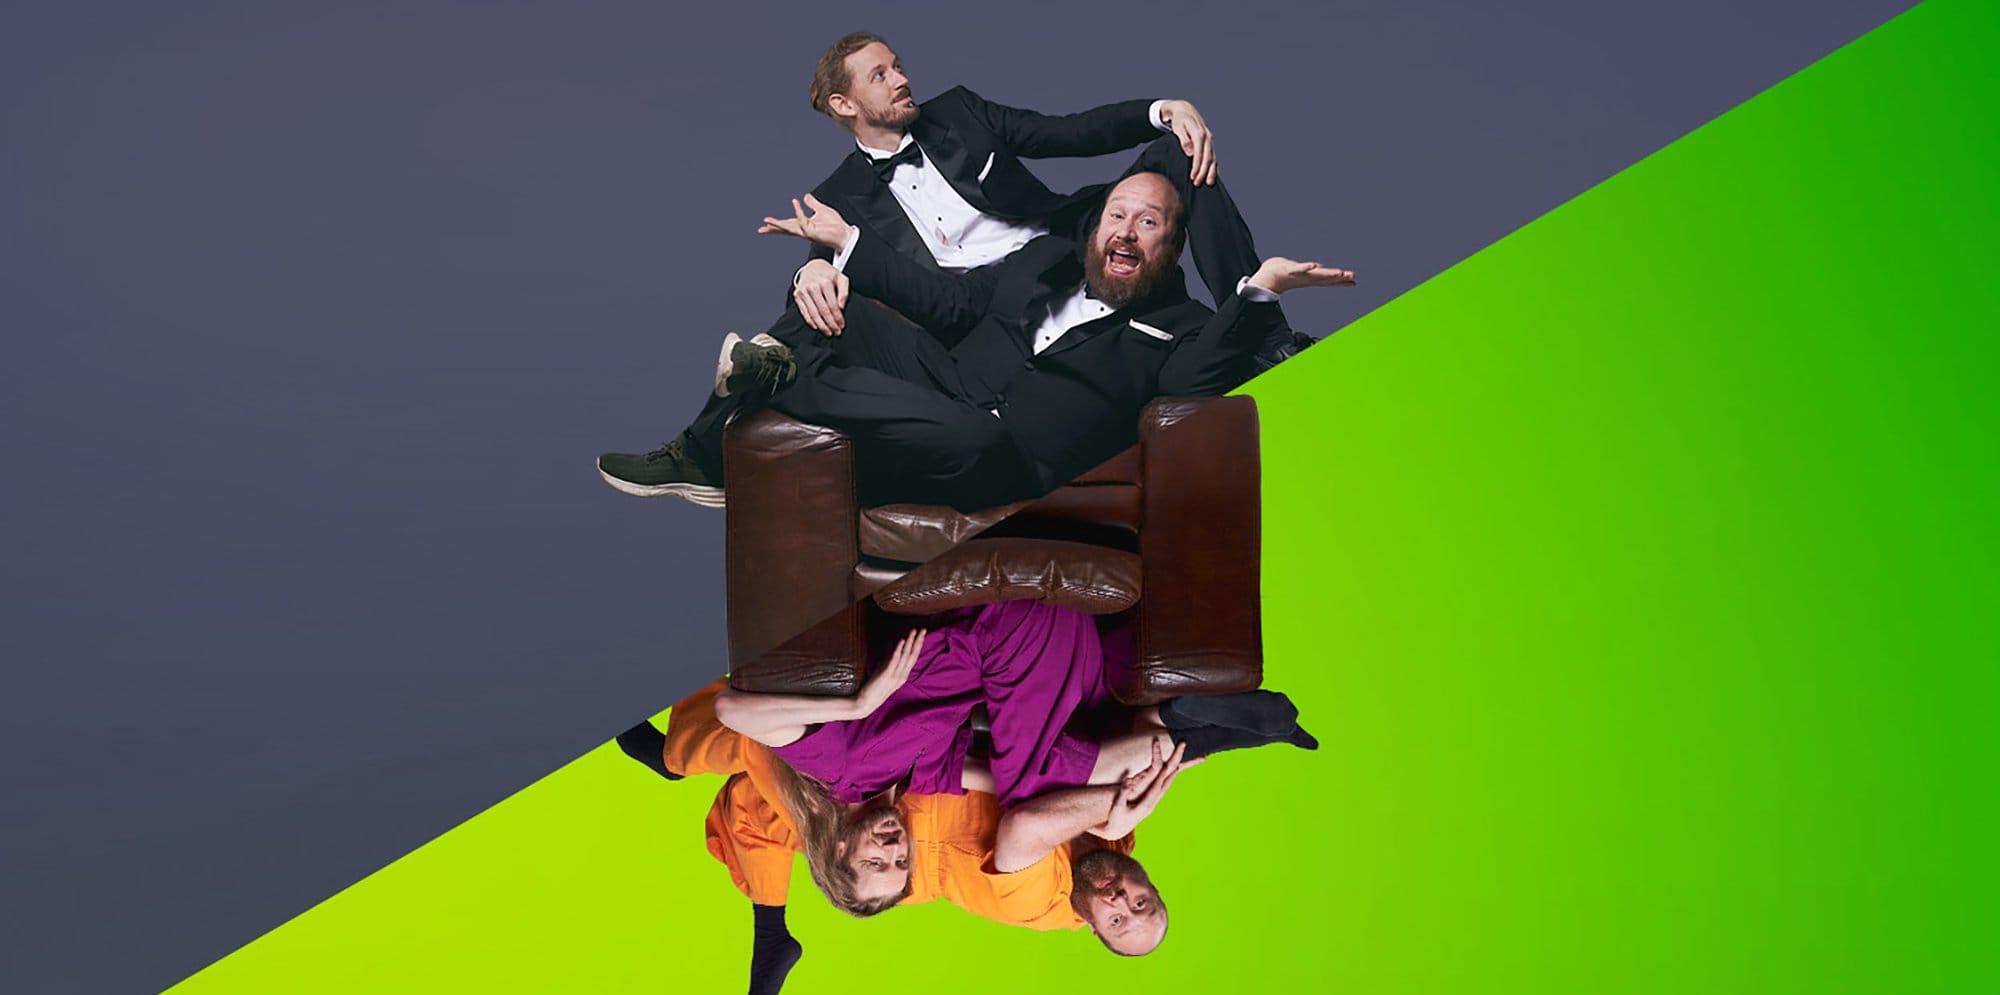 The members of the comedy group Jonny Baptists in a split image, on one side they wear tuxedos and the other in comfy vibrant clothing while laying over a leather chair